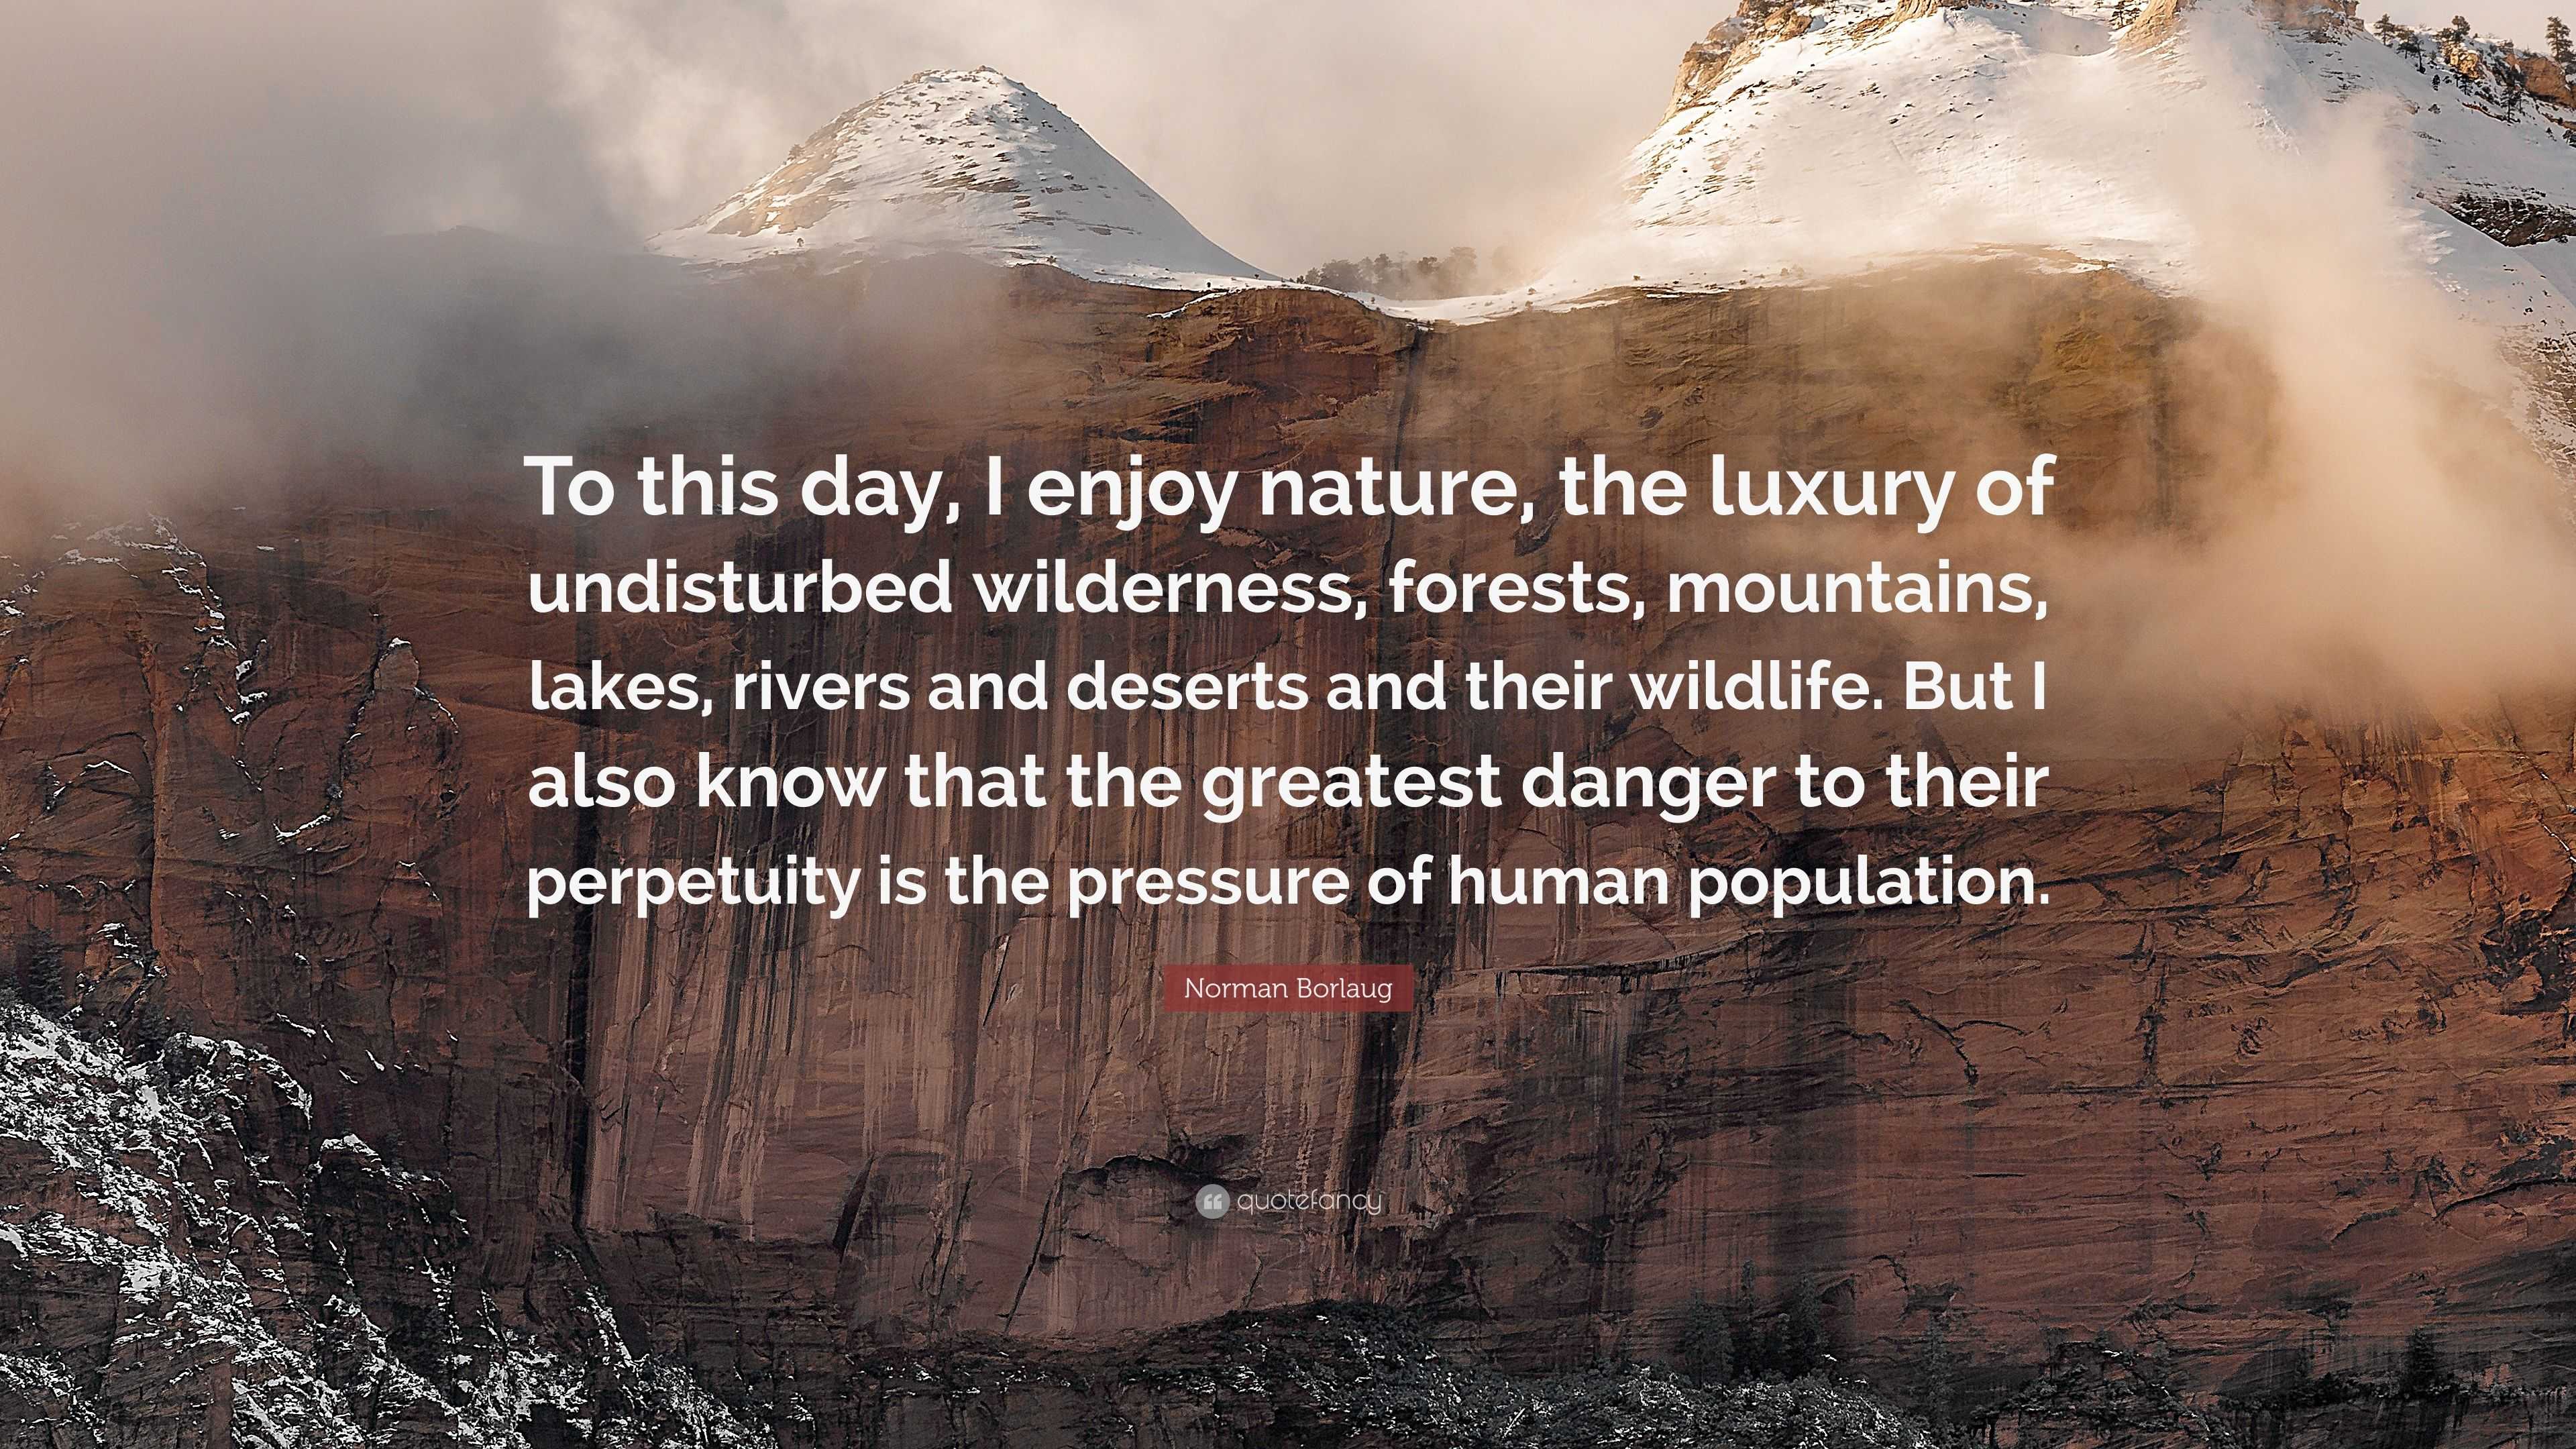 Norman Borlaug Quote: “To this day, enjoy the luxury of undisturbed wilderness, forests, mountains, lakes, rivers and deserts and the...”